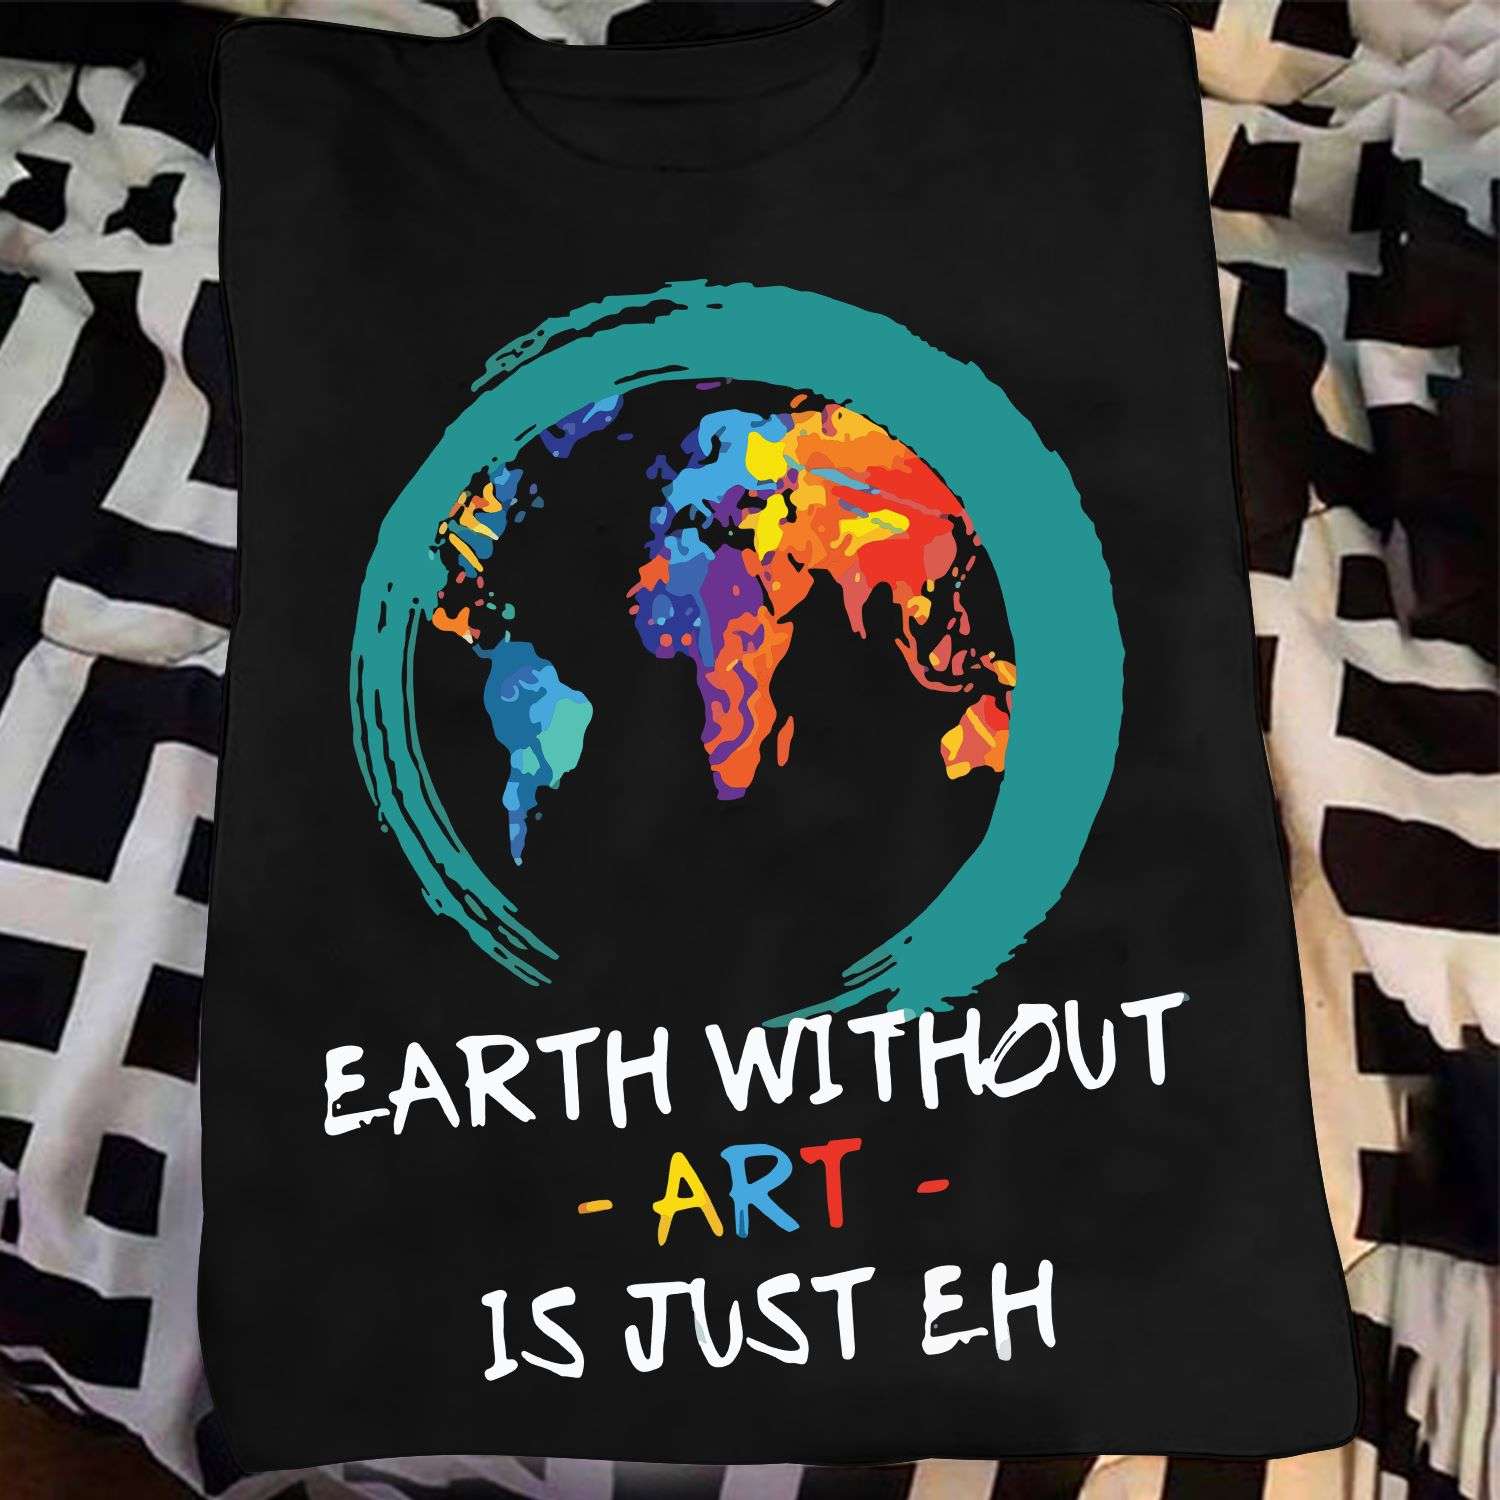 Earth without art is just eh - World of art, art makes beautiful earth